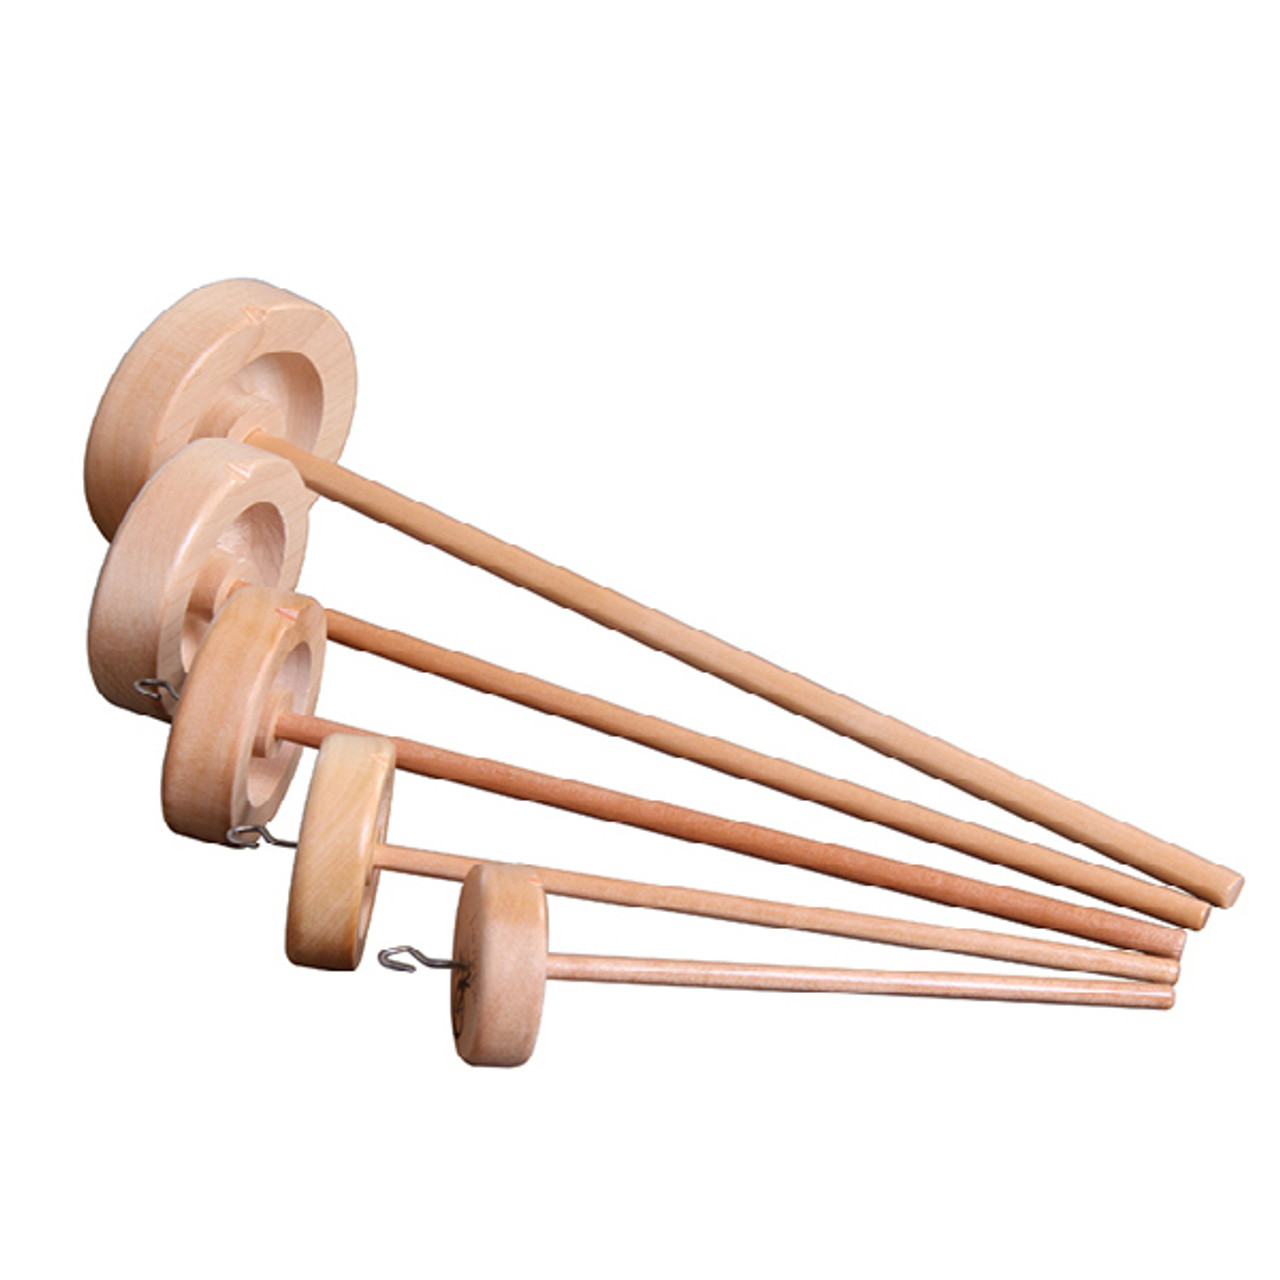 Learn to Spin on a Traditional Drop Spindle 